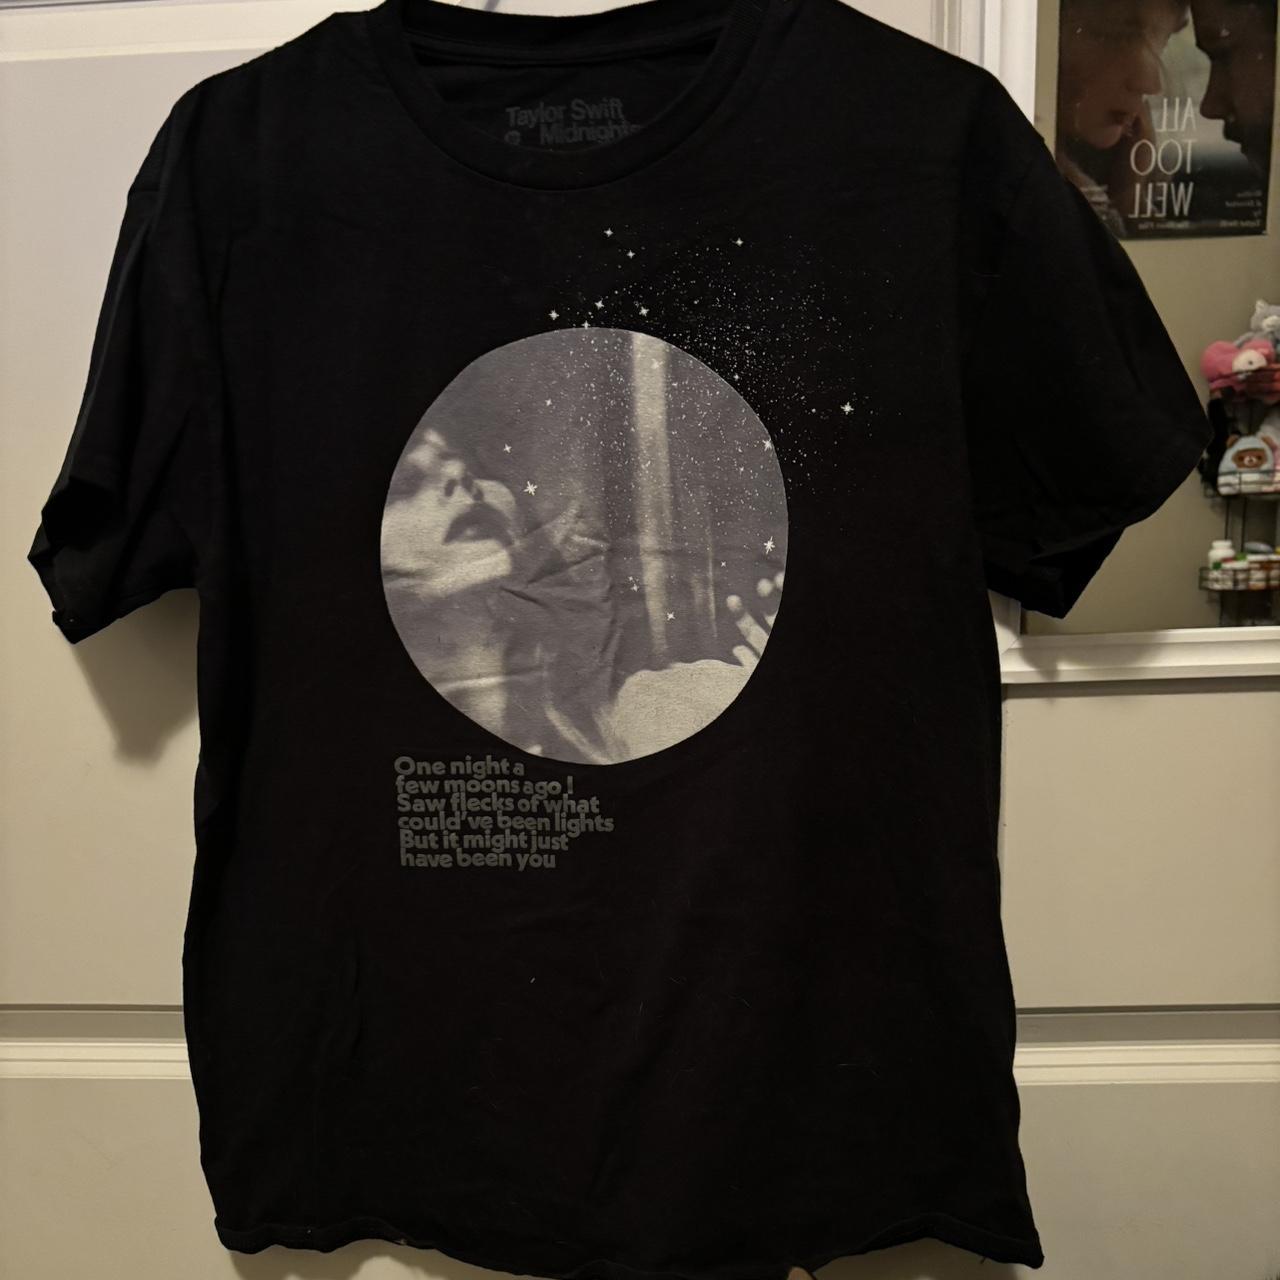 Taylor swift official snow on the beach t-shirt in... - Depop